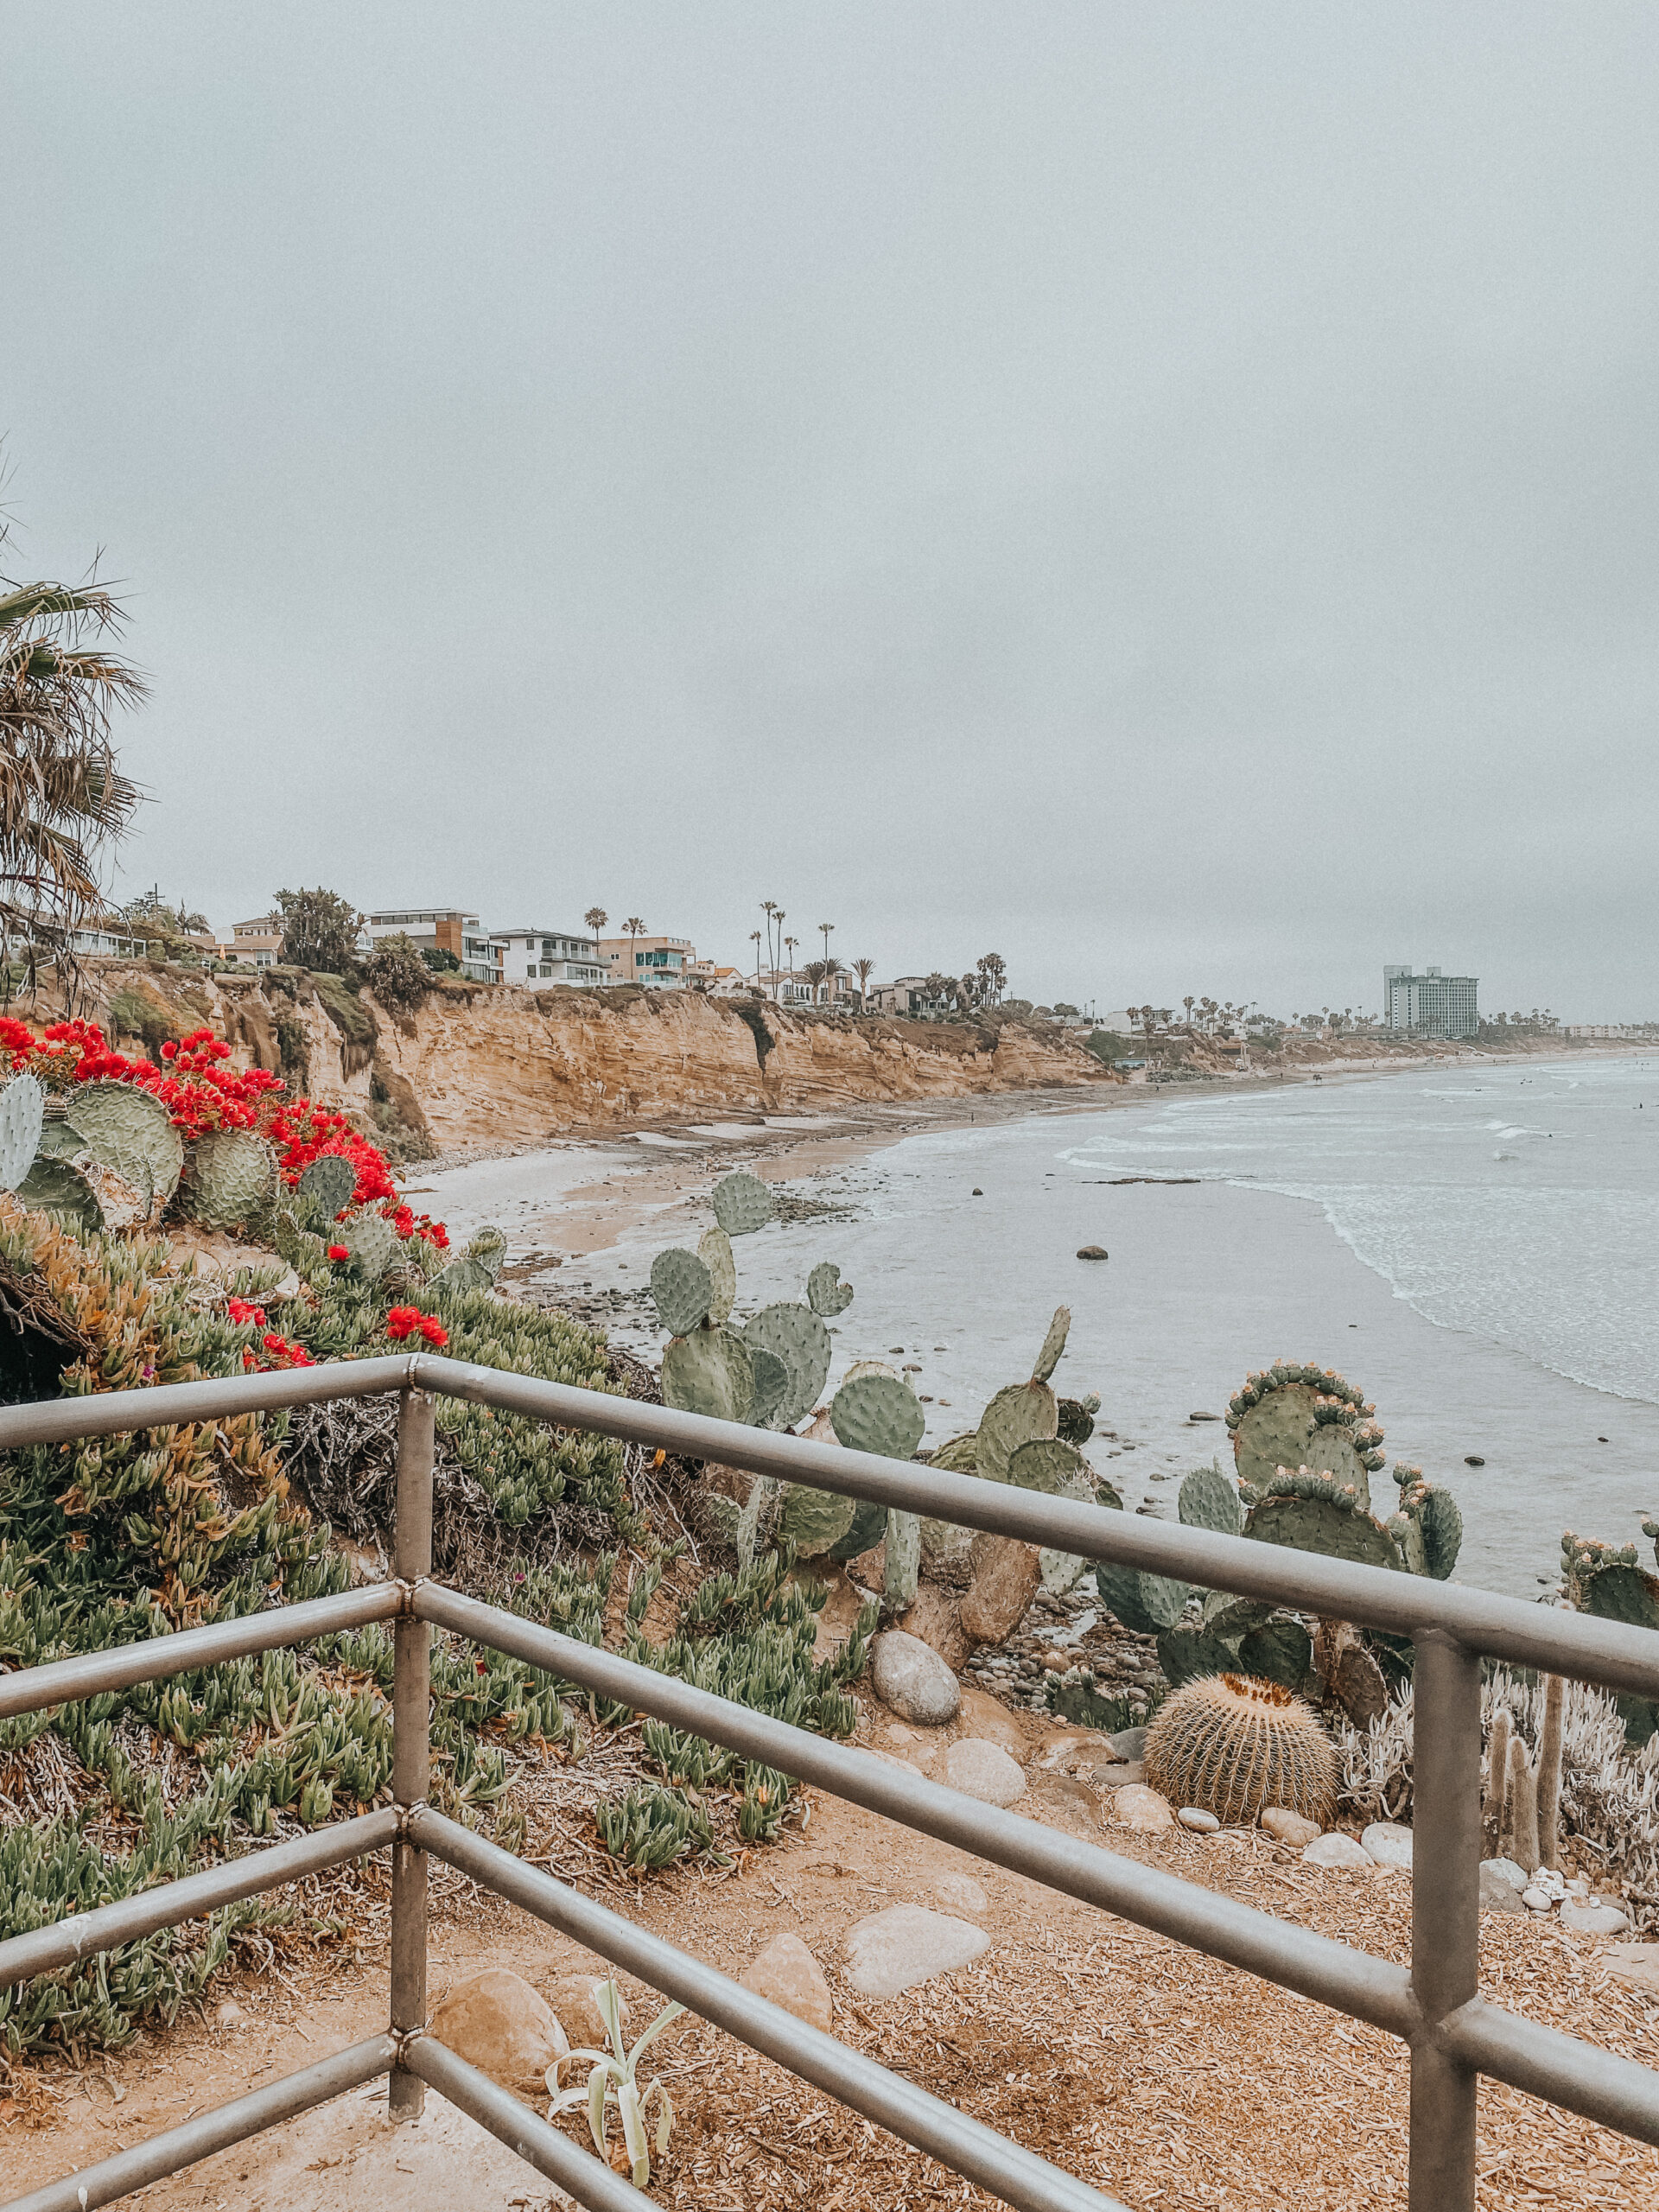 Locals Only: 4 La Jolla Hidden Gems you’ll absolutely love